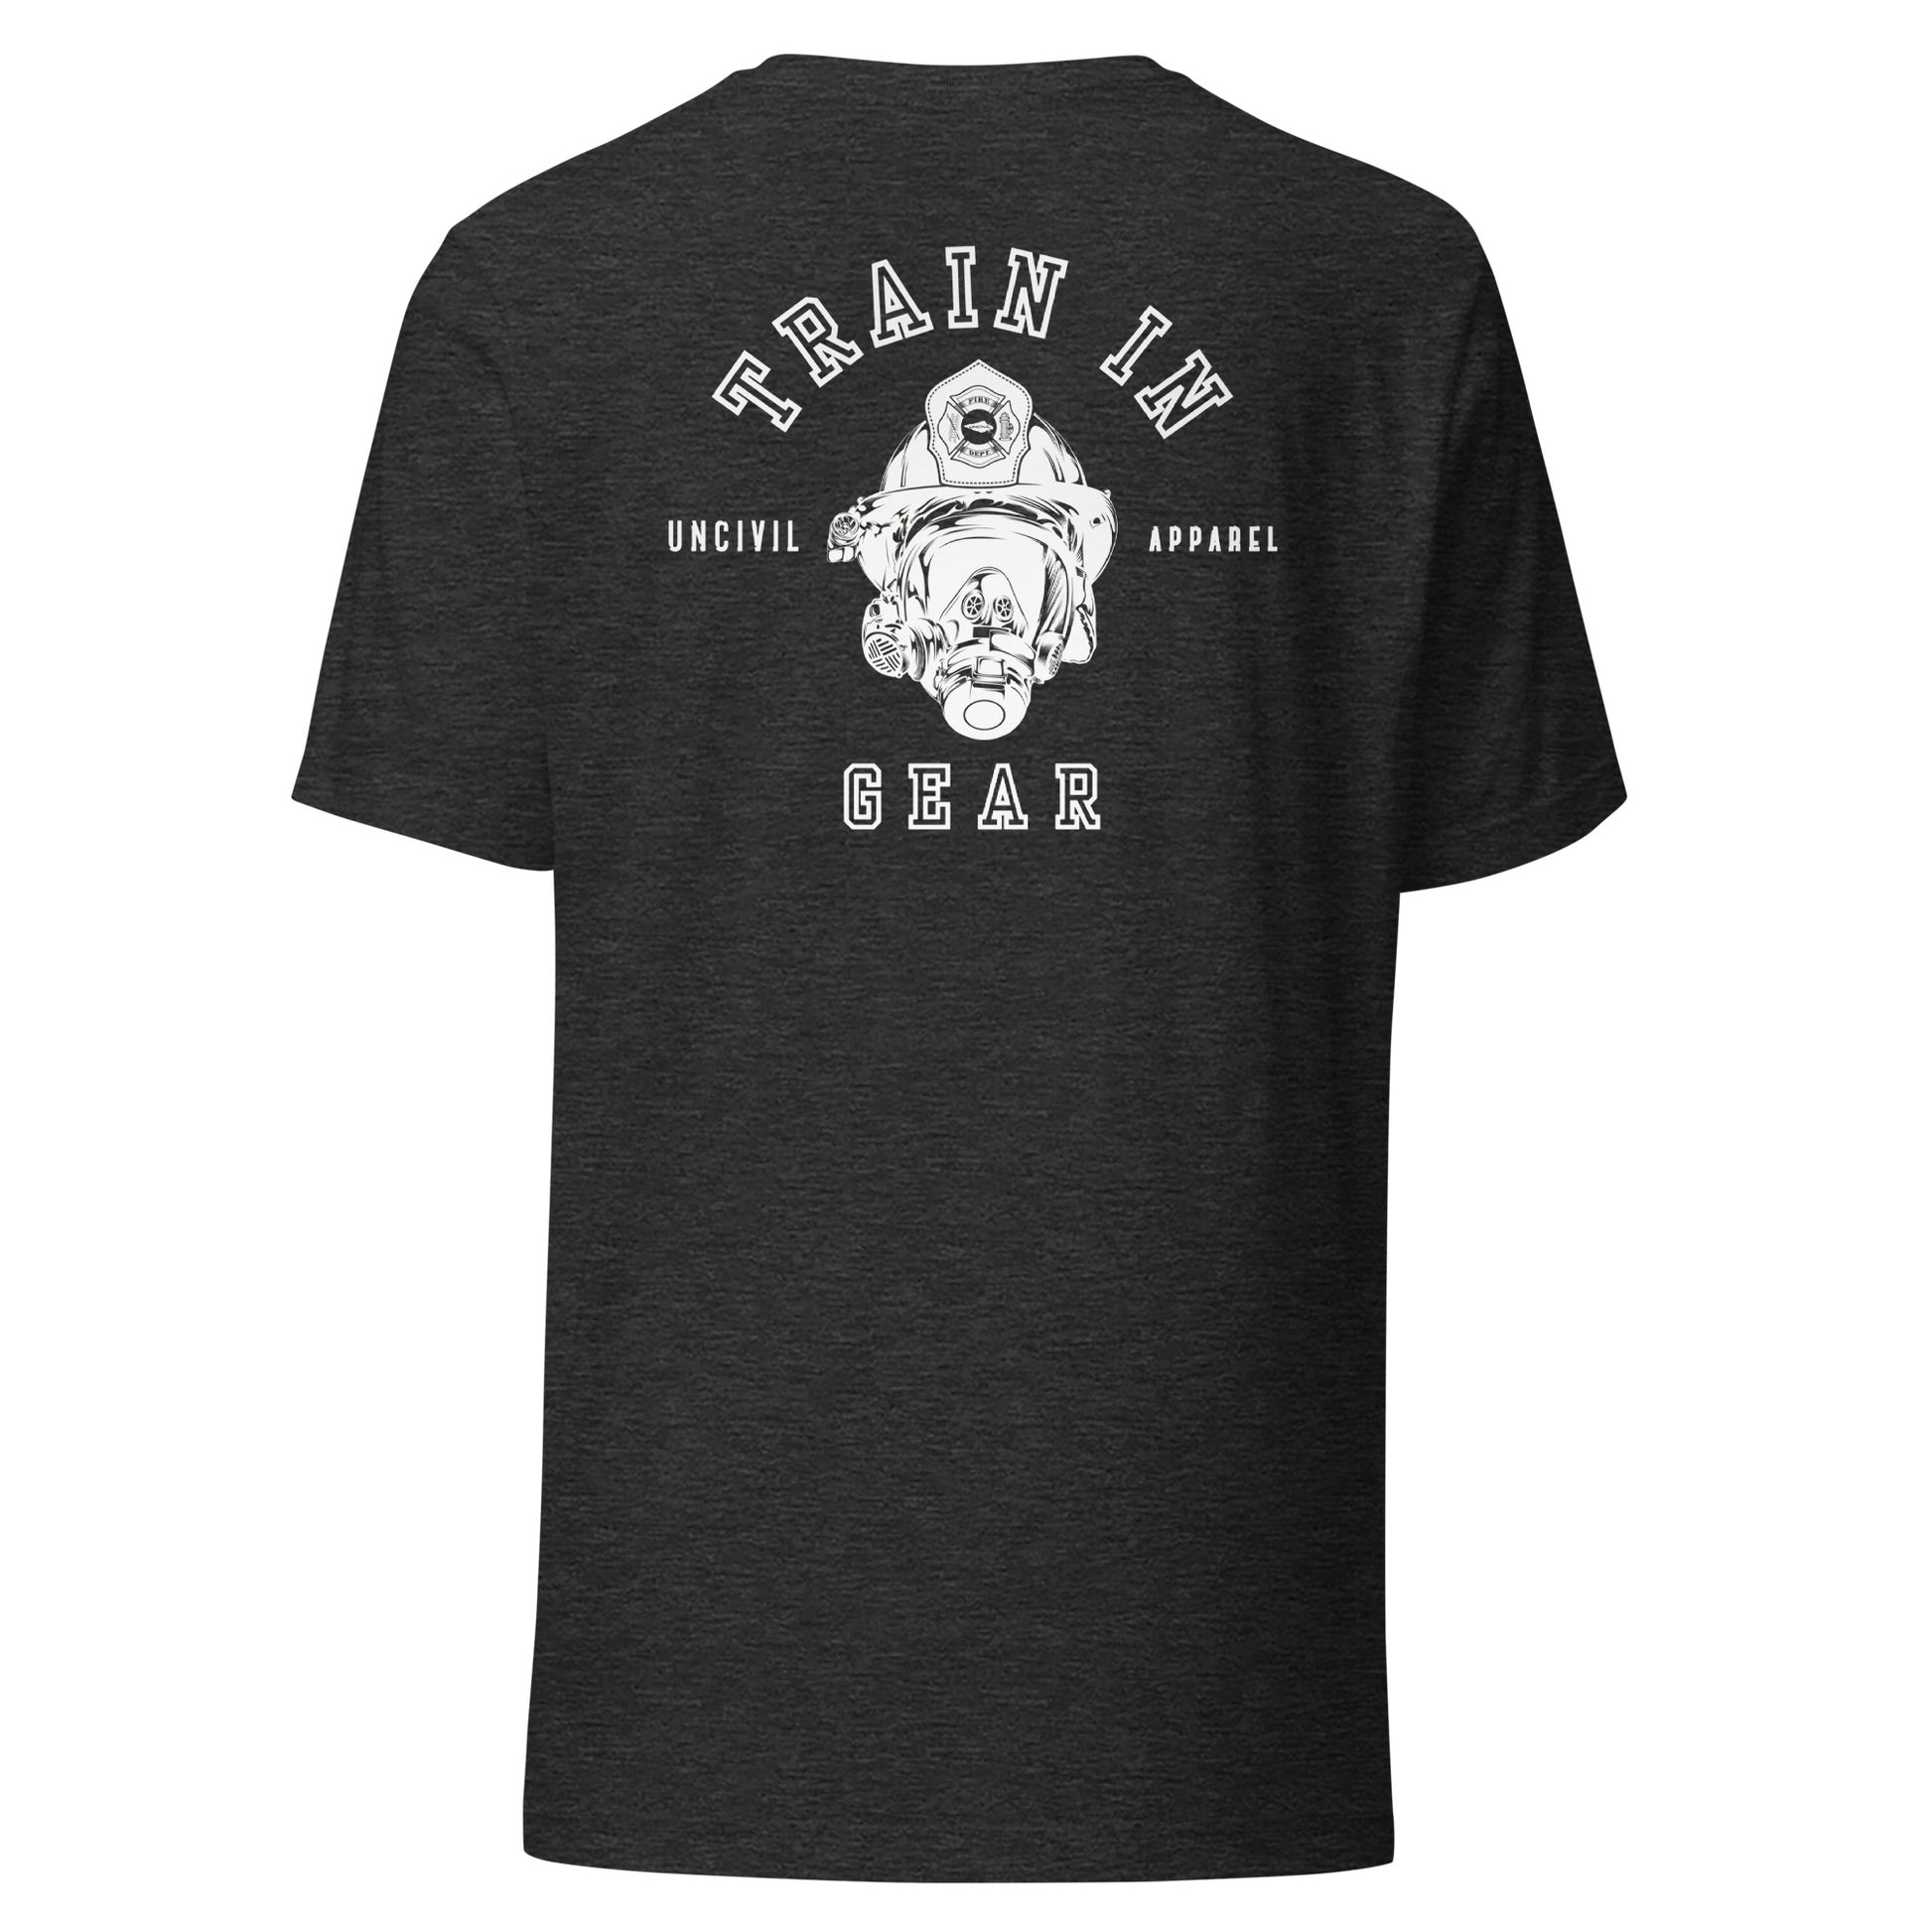 Train in Gear Graphic T-shirt, Firefighter and Military shirts, Charcoal Grey.